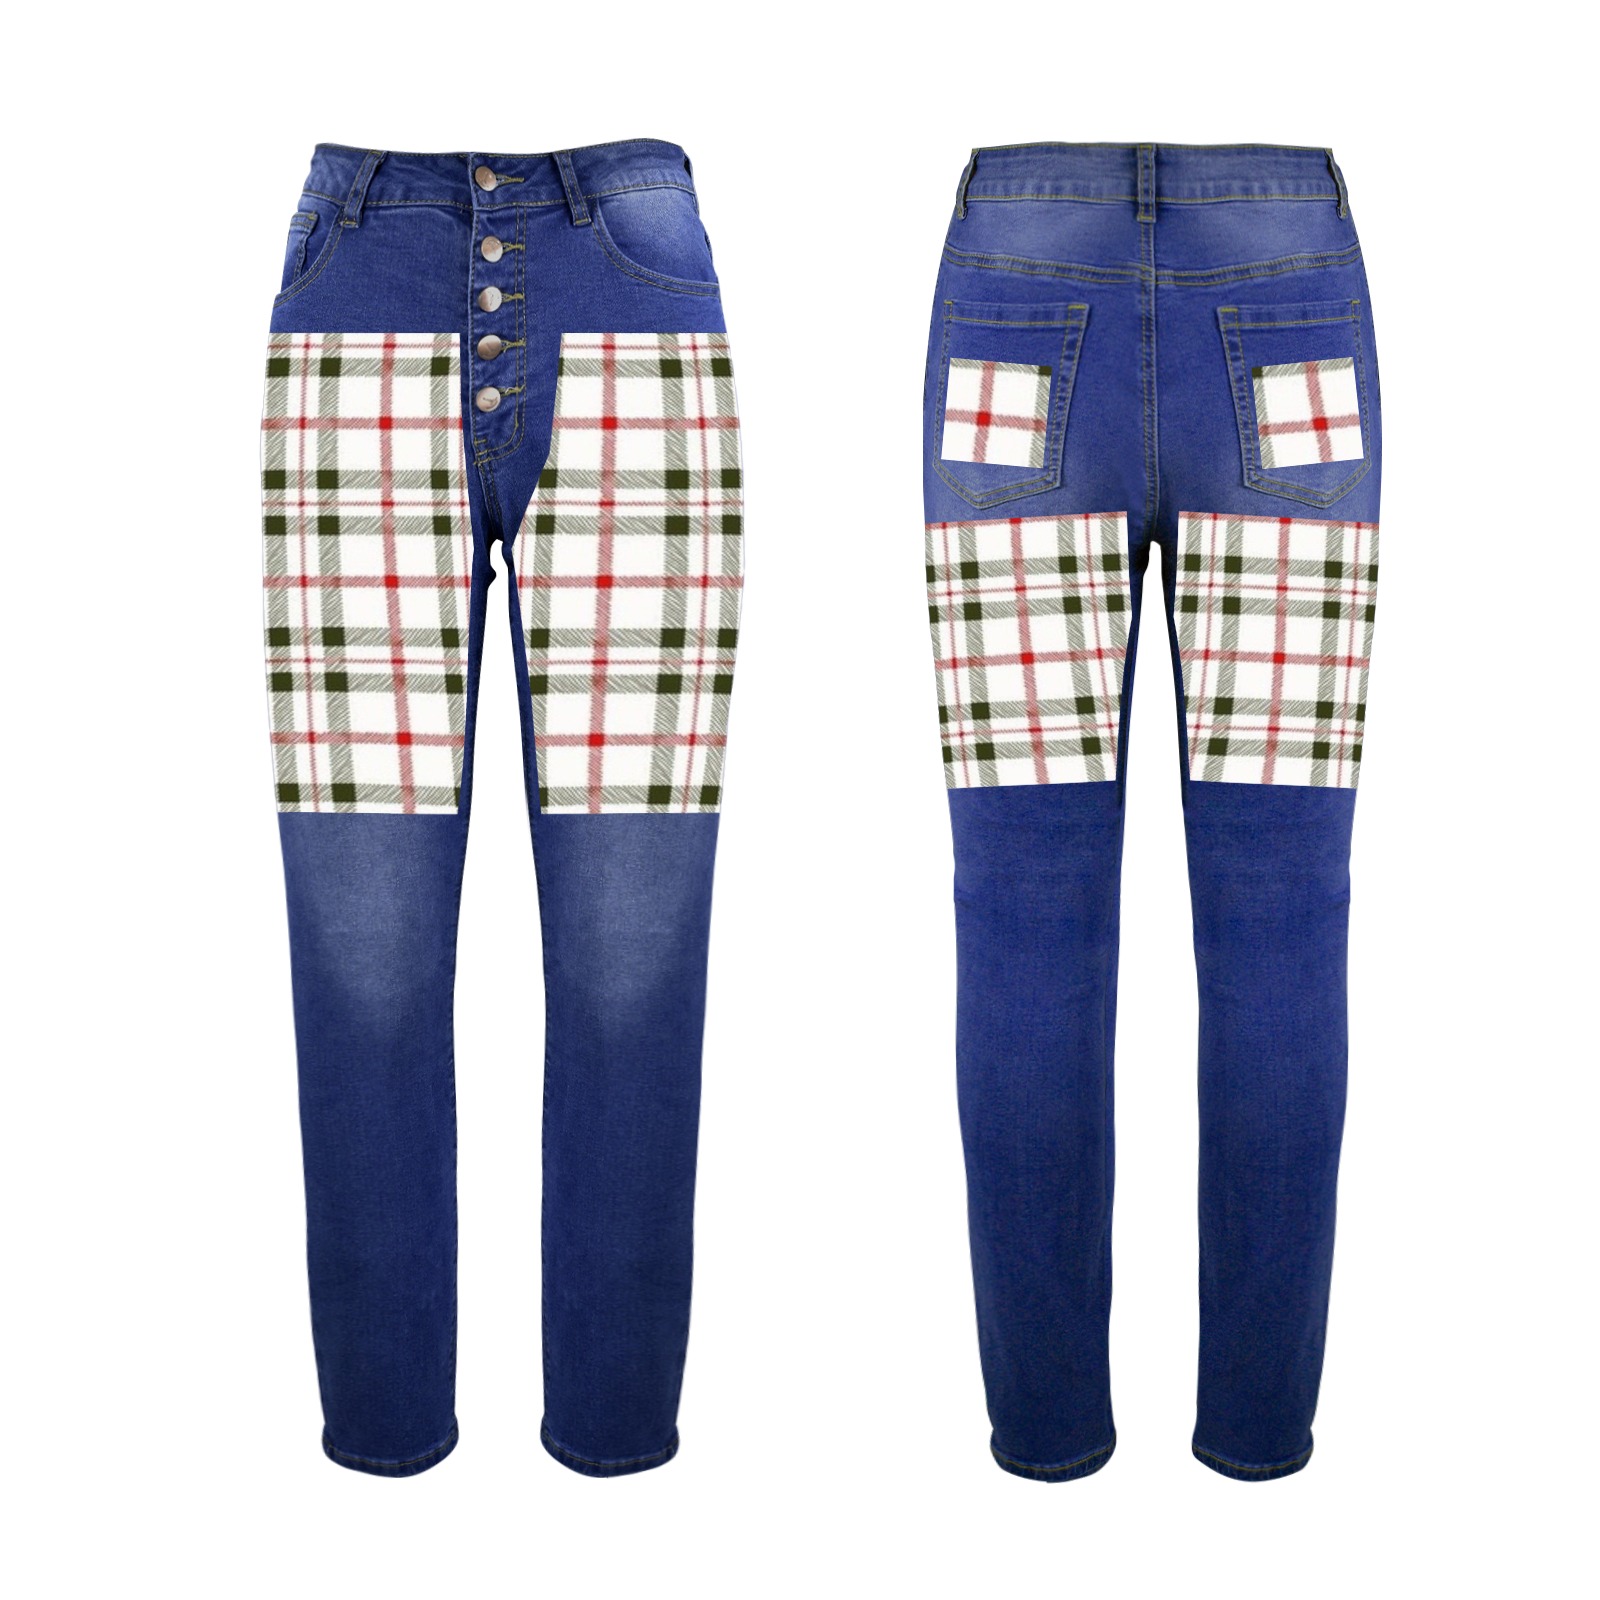 Plaids 6 Women's Jeans (Front&Back Printing)